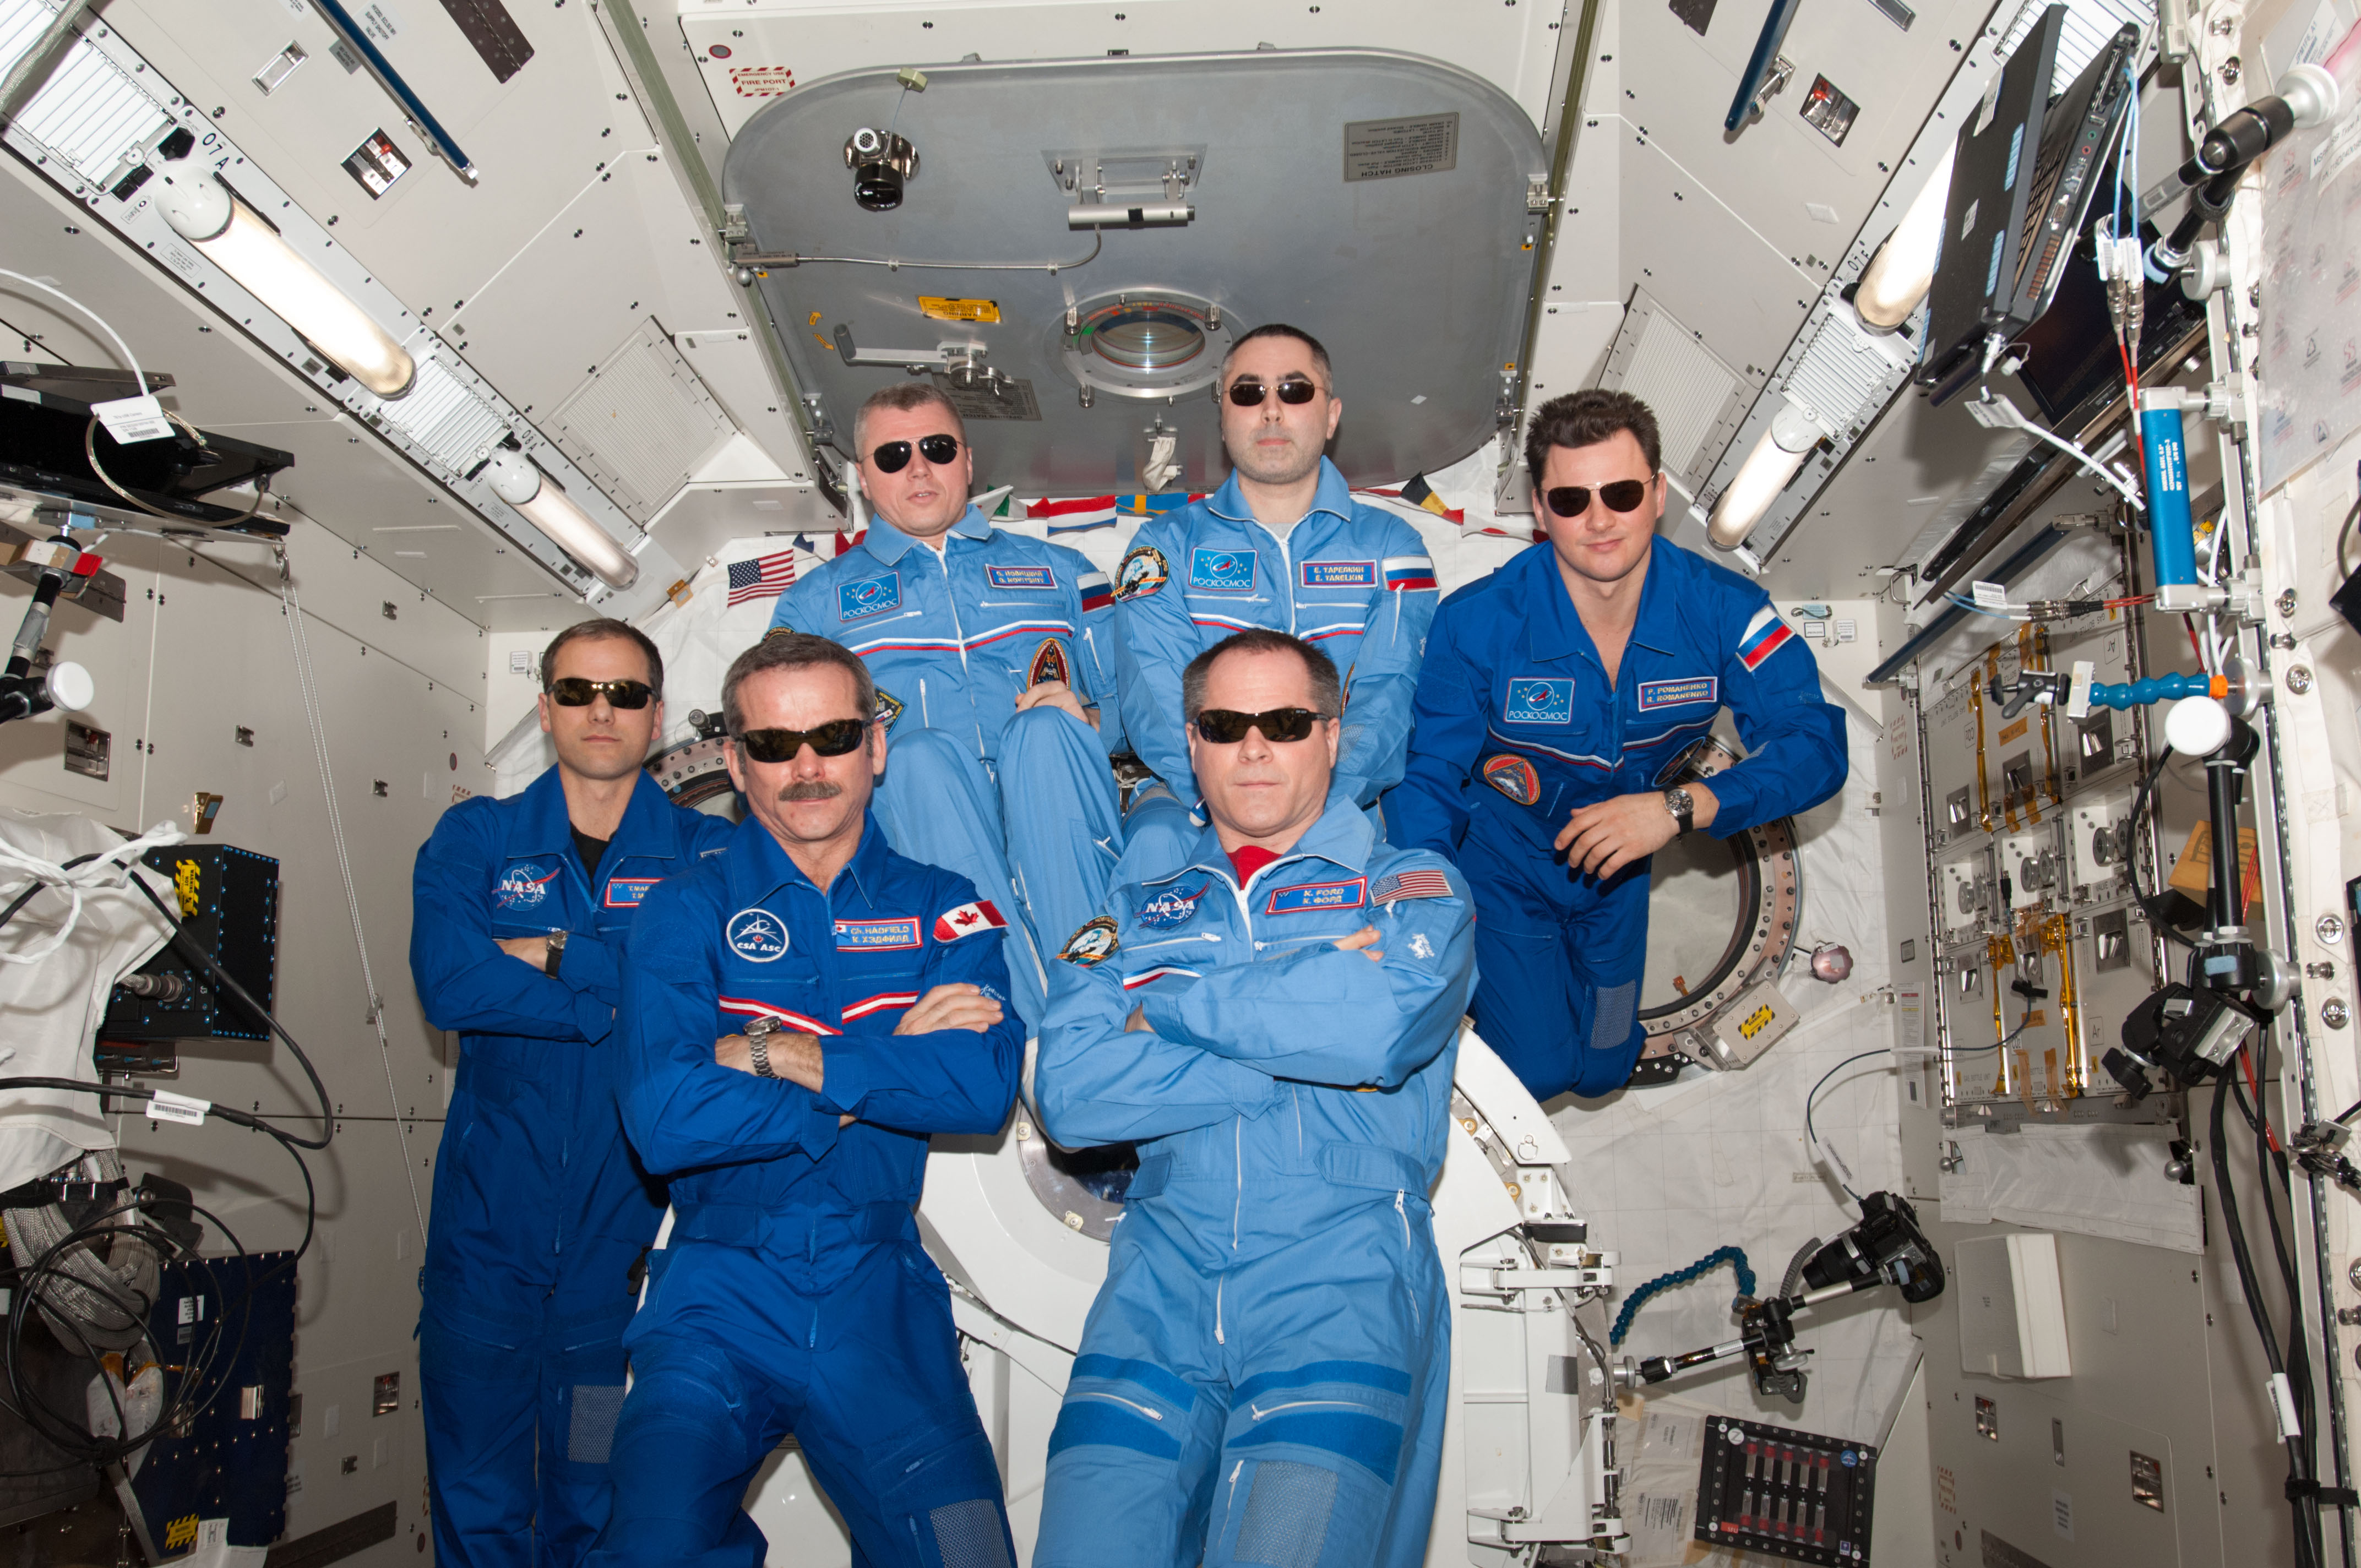 ISS Expedition 34 inflight crew portrait